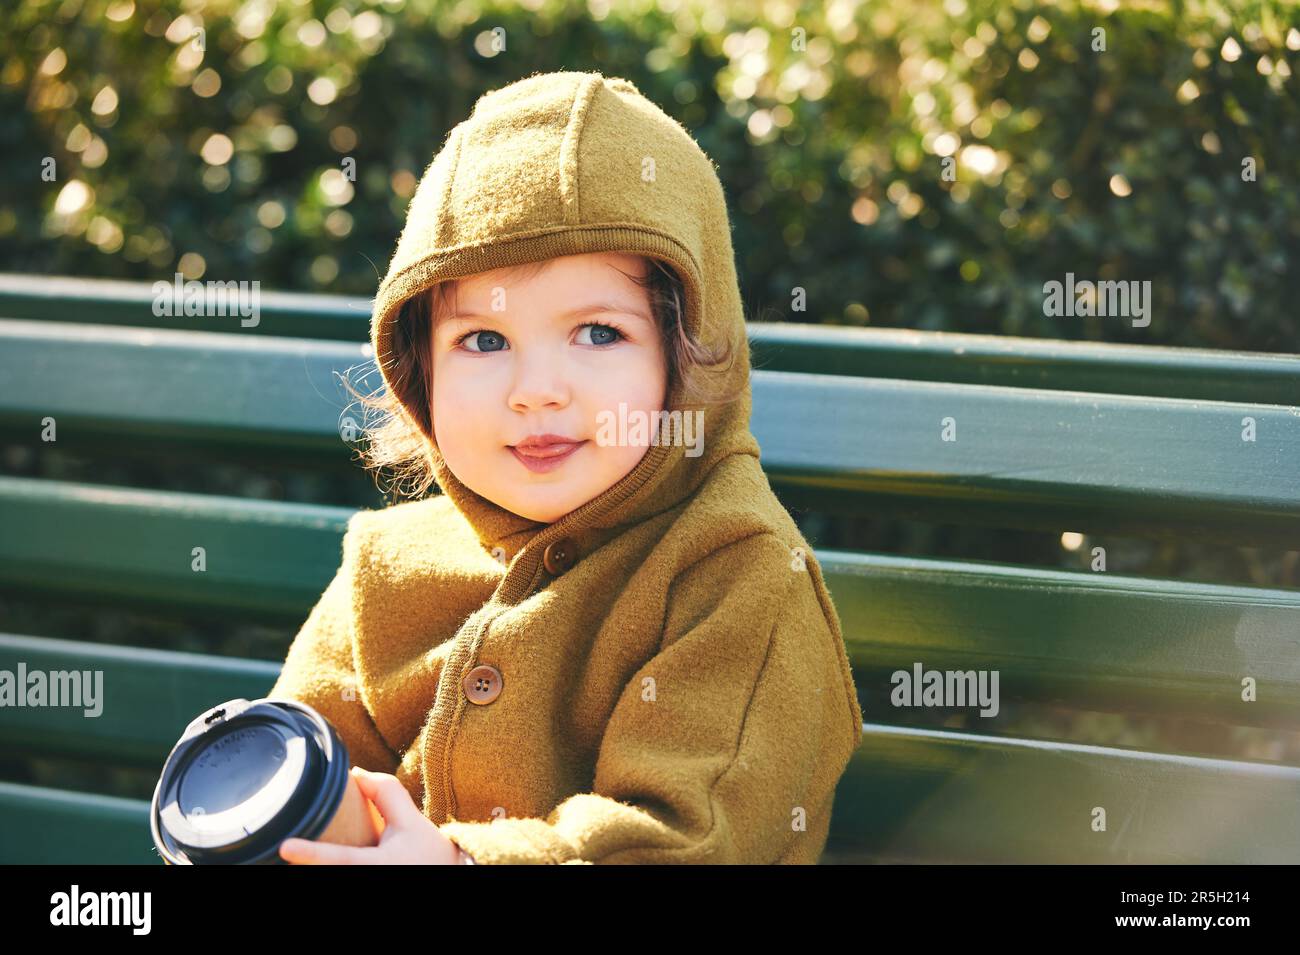 Funny toddler kid resting on bench, holding paper cup of take away coffee Stock Photo